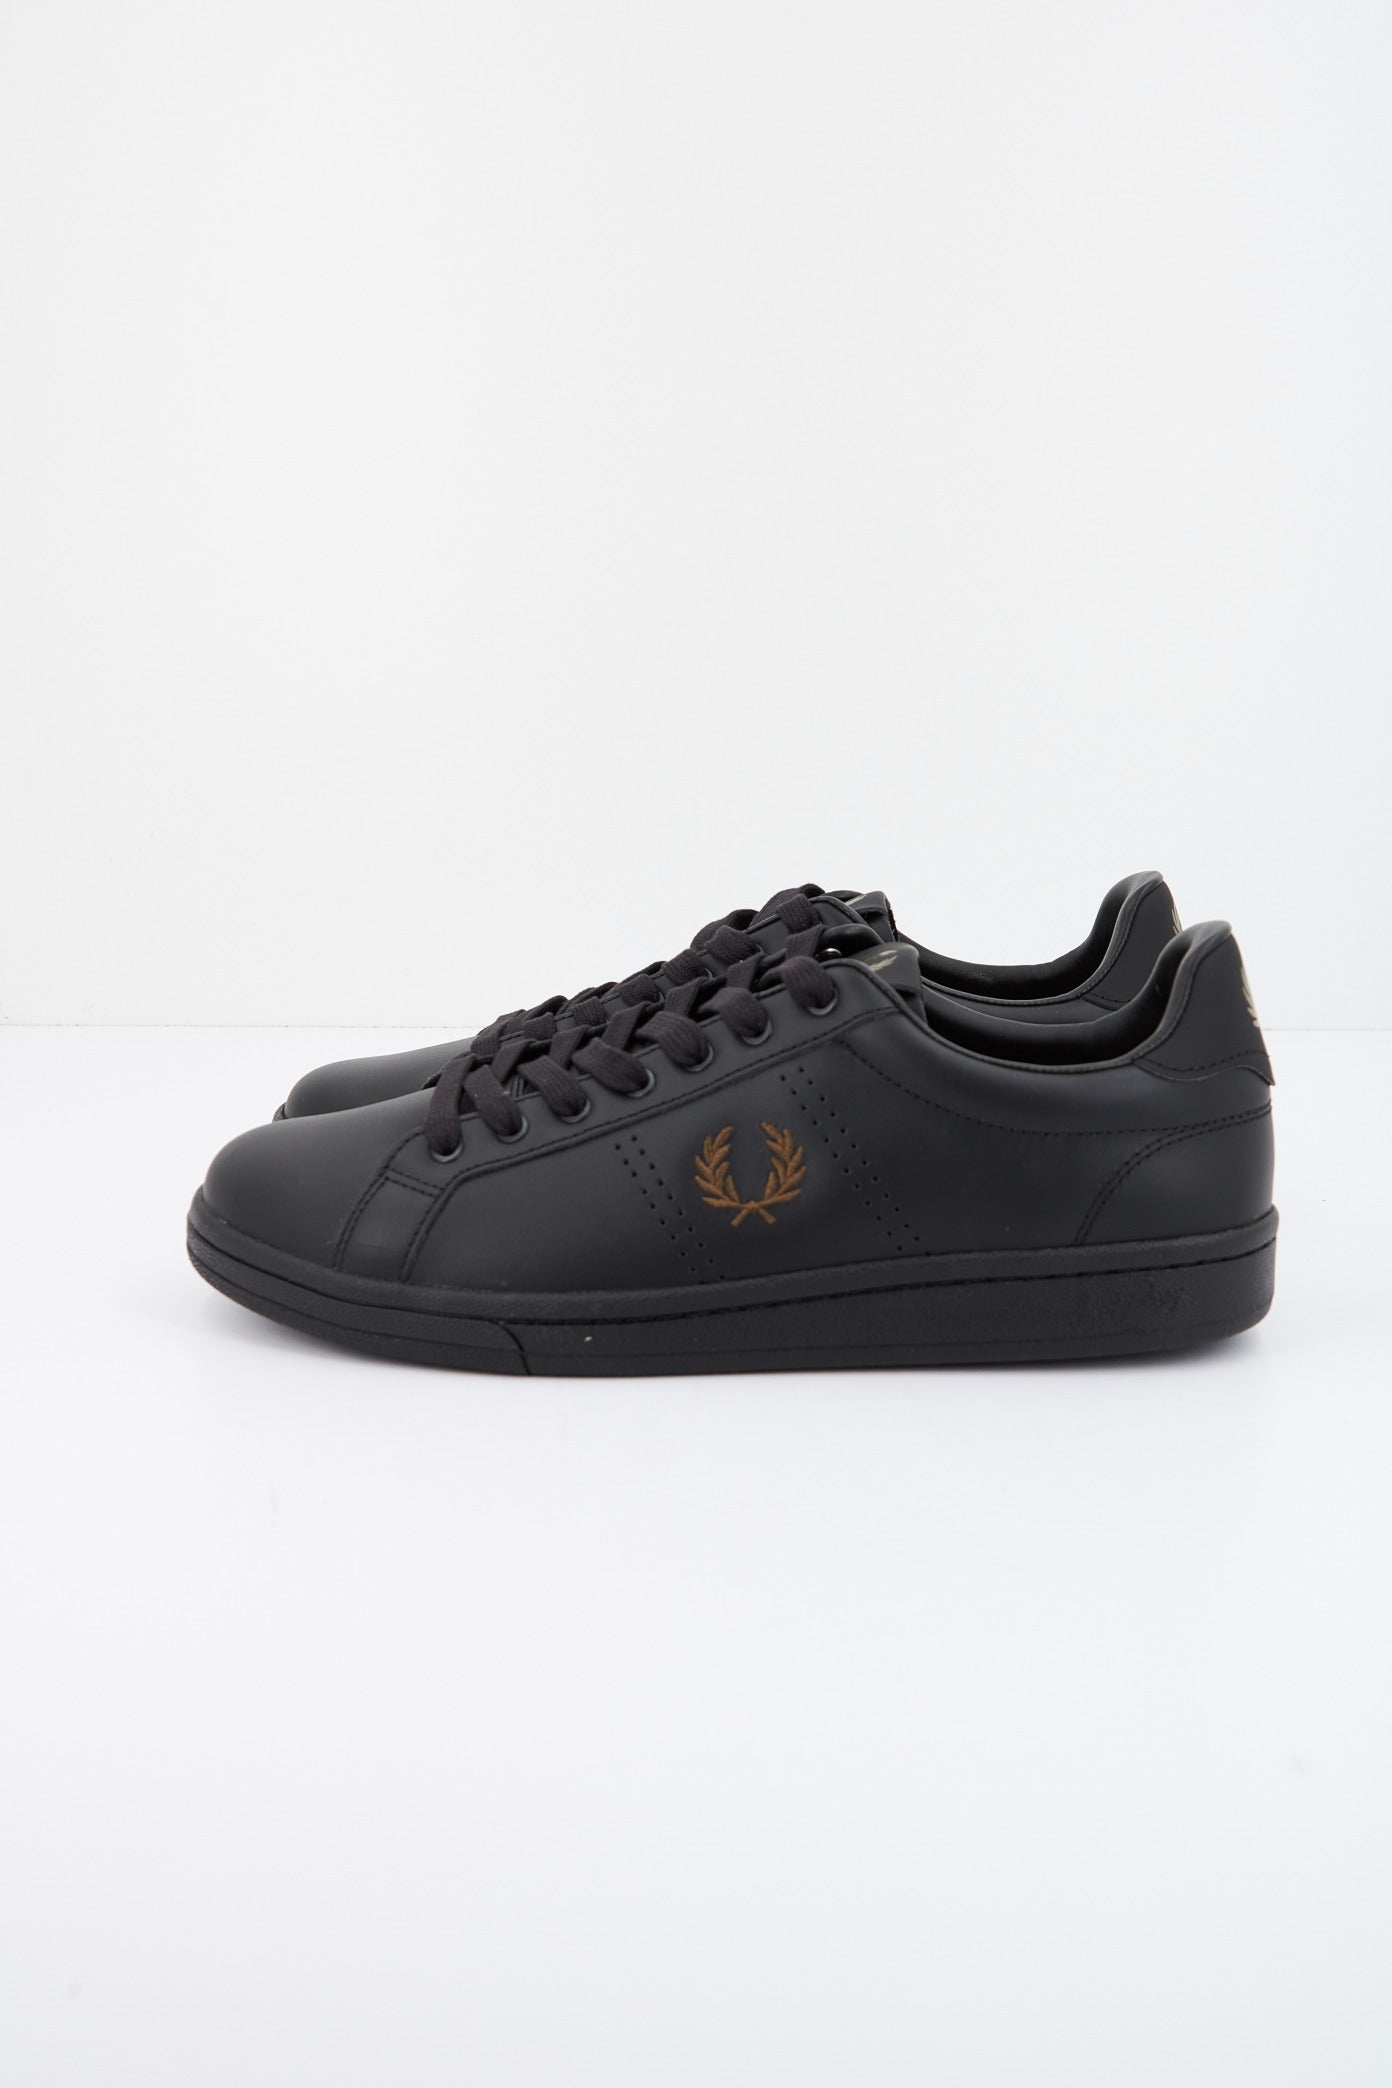 FRED PERRY LEATHER en color NEGRO  (1)